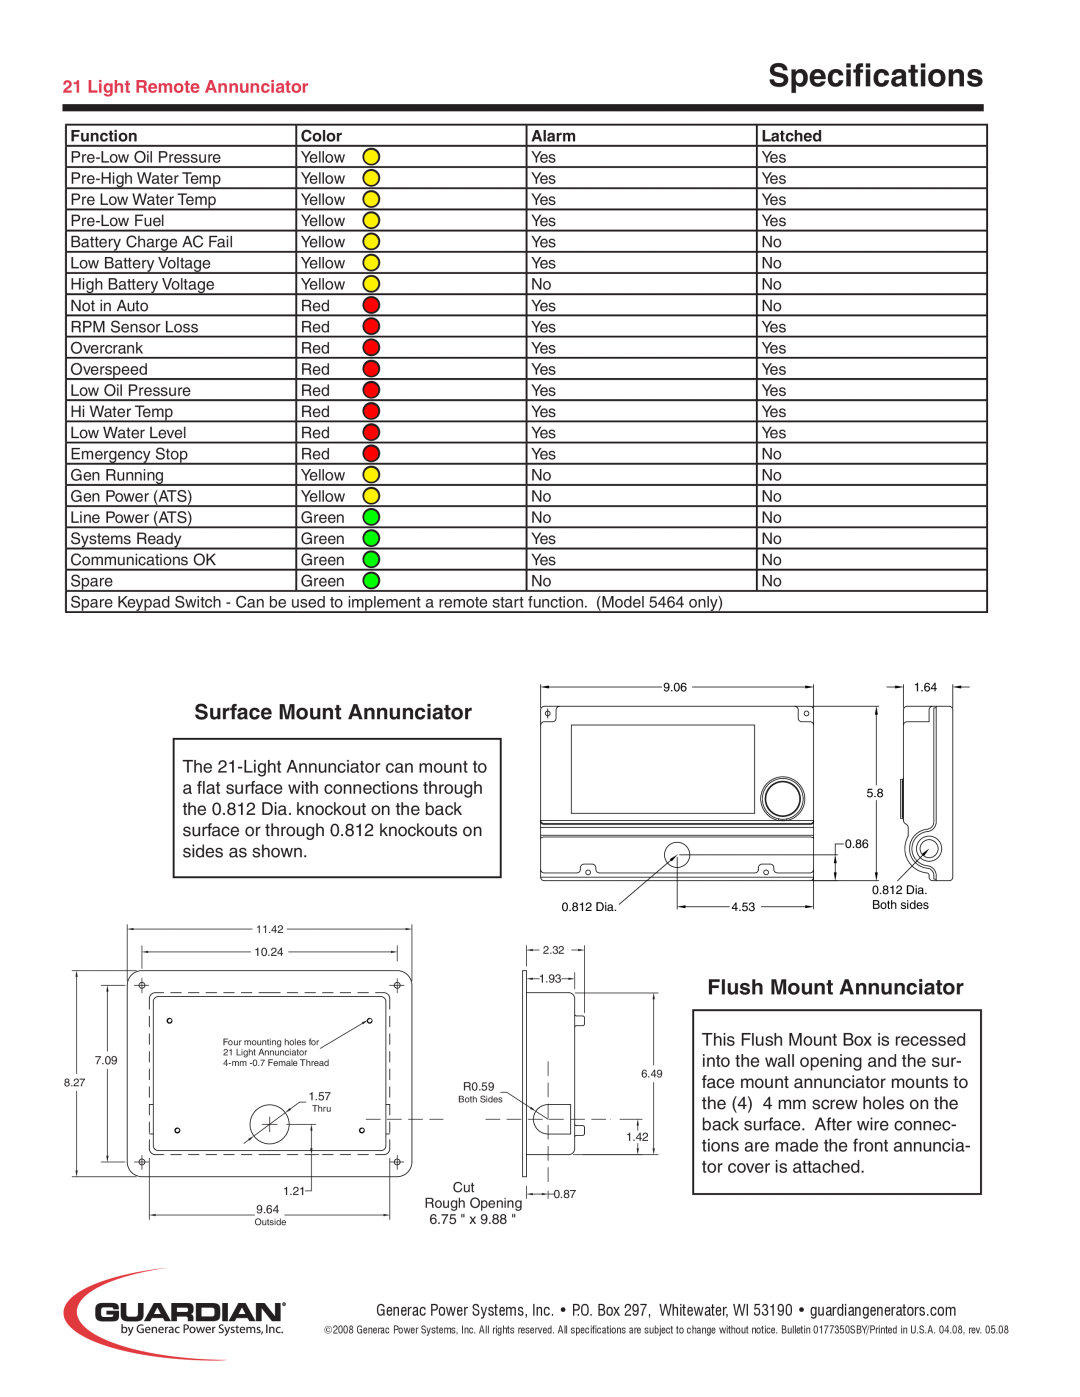 Generac Power Systems 5466 Specifications, Surface Mount Annunciator, Flush Mount Annunciator, Light Remote Annunciator 